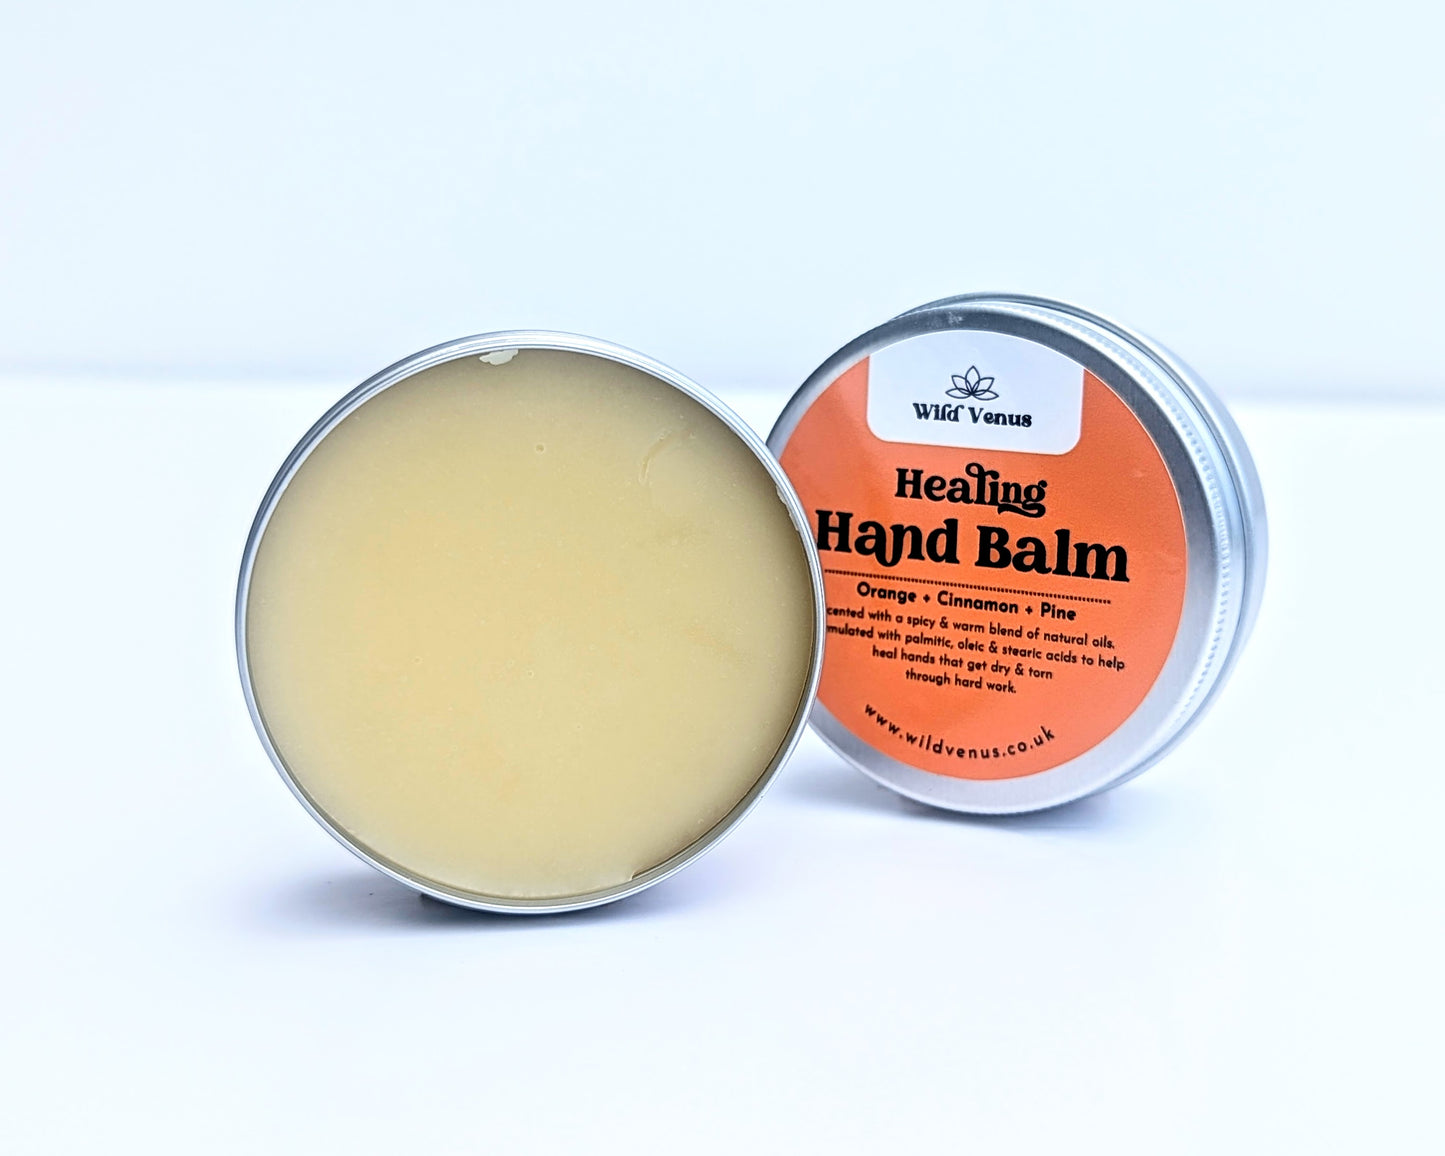 An open container of the Healing Hand Balm. The balm is shown against a white background and the tin lid is tucked behind.